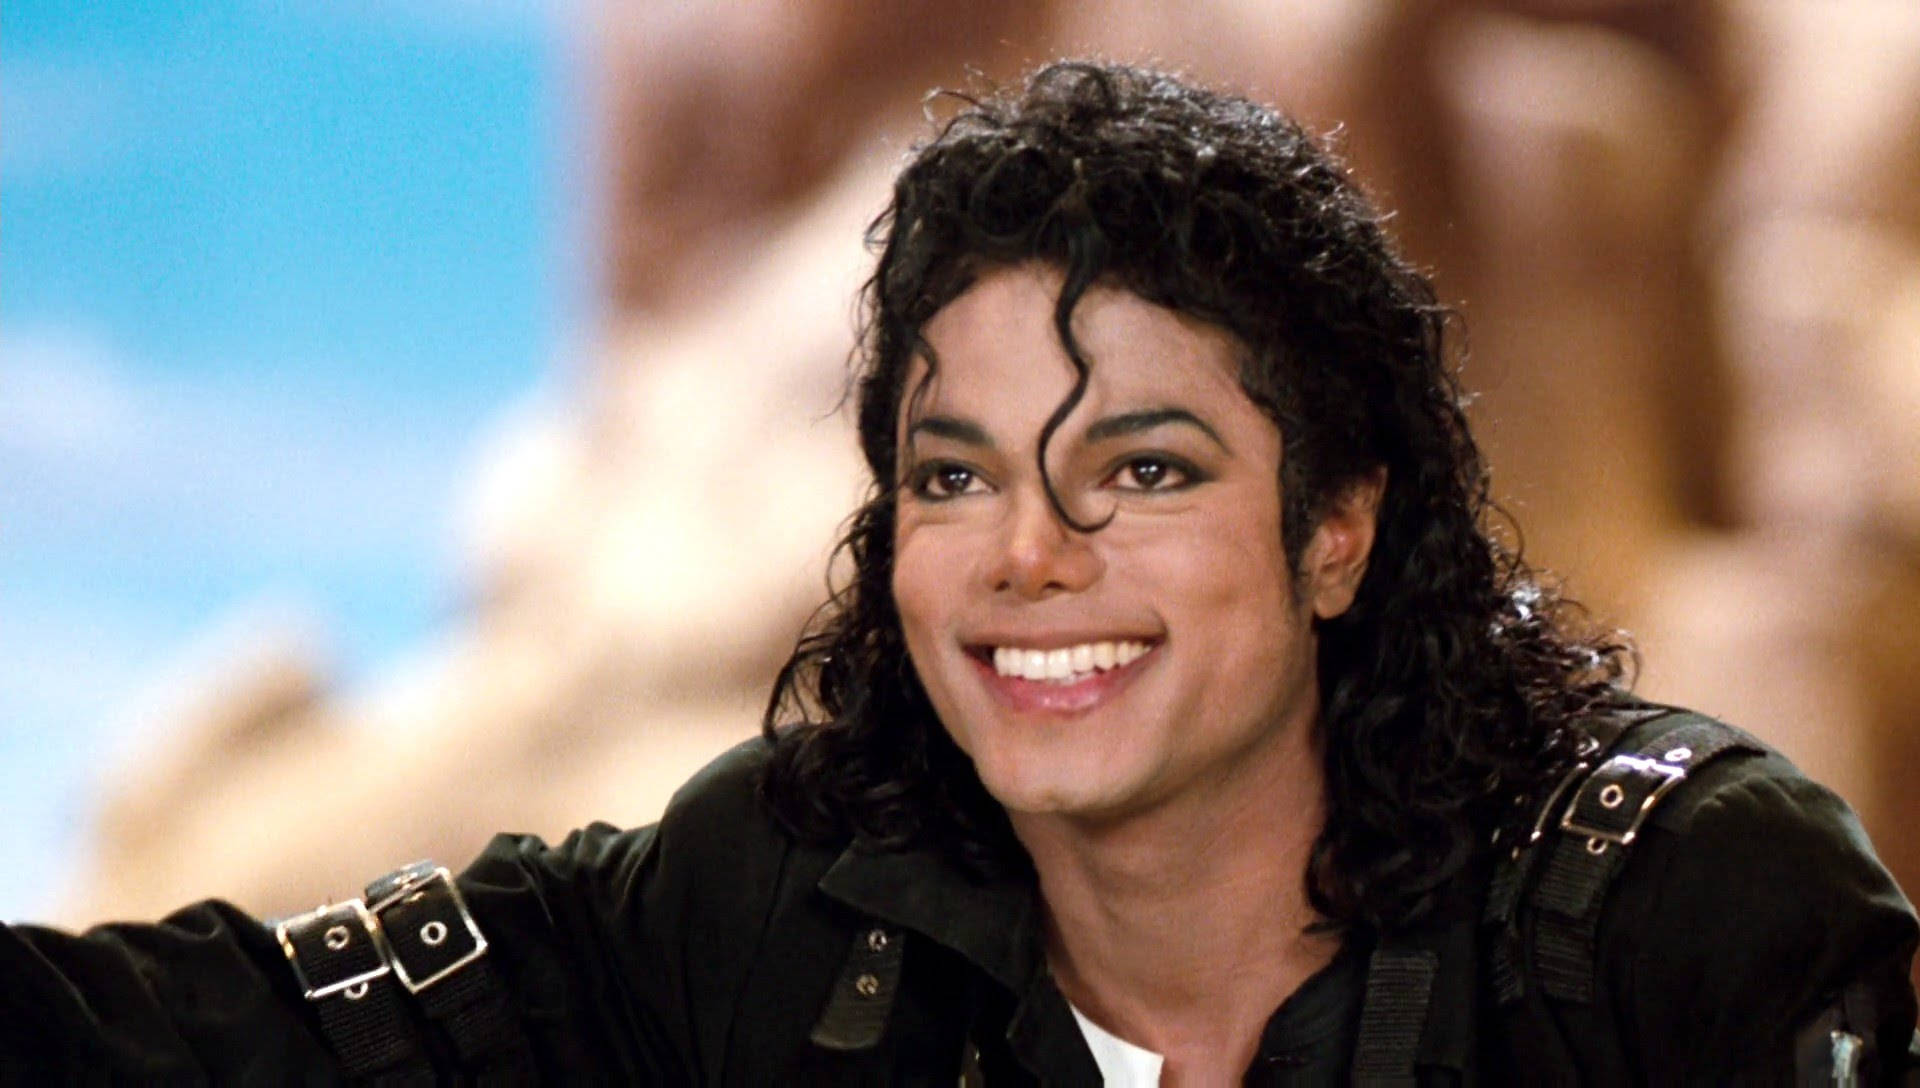 Michael Jackson 1920X1088 Wallpaper and Background Image